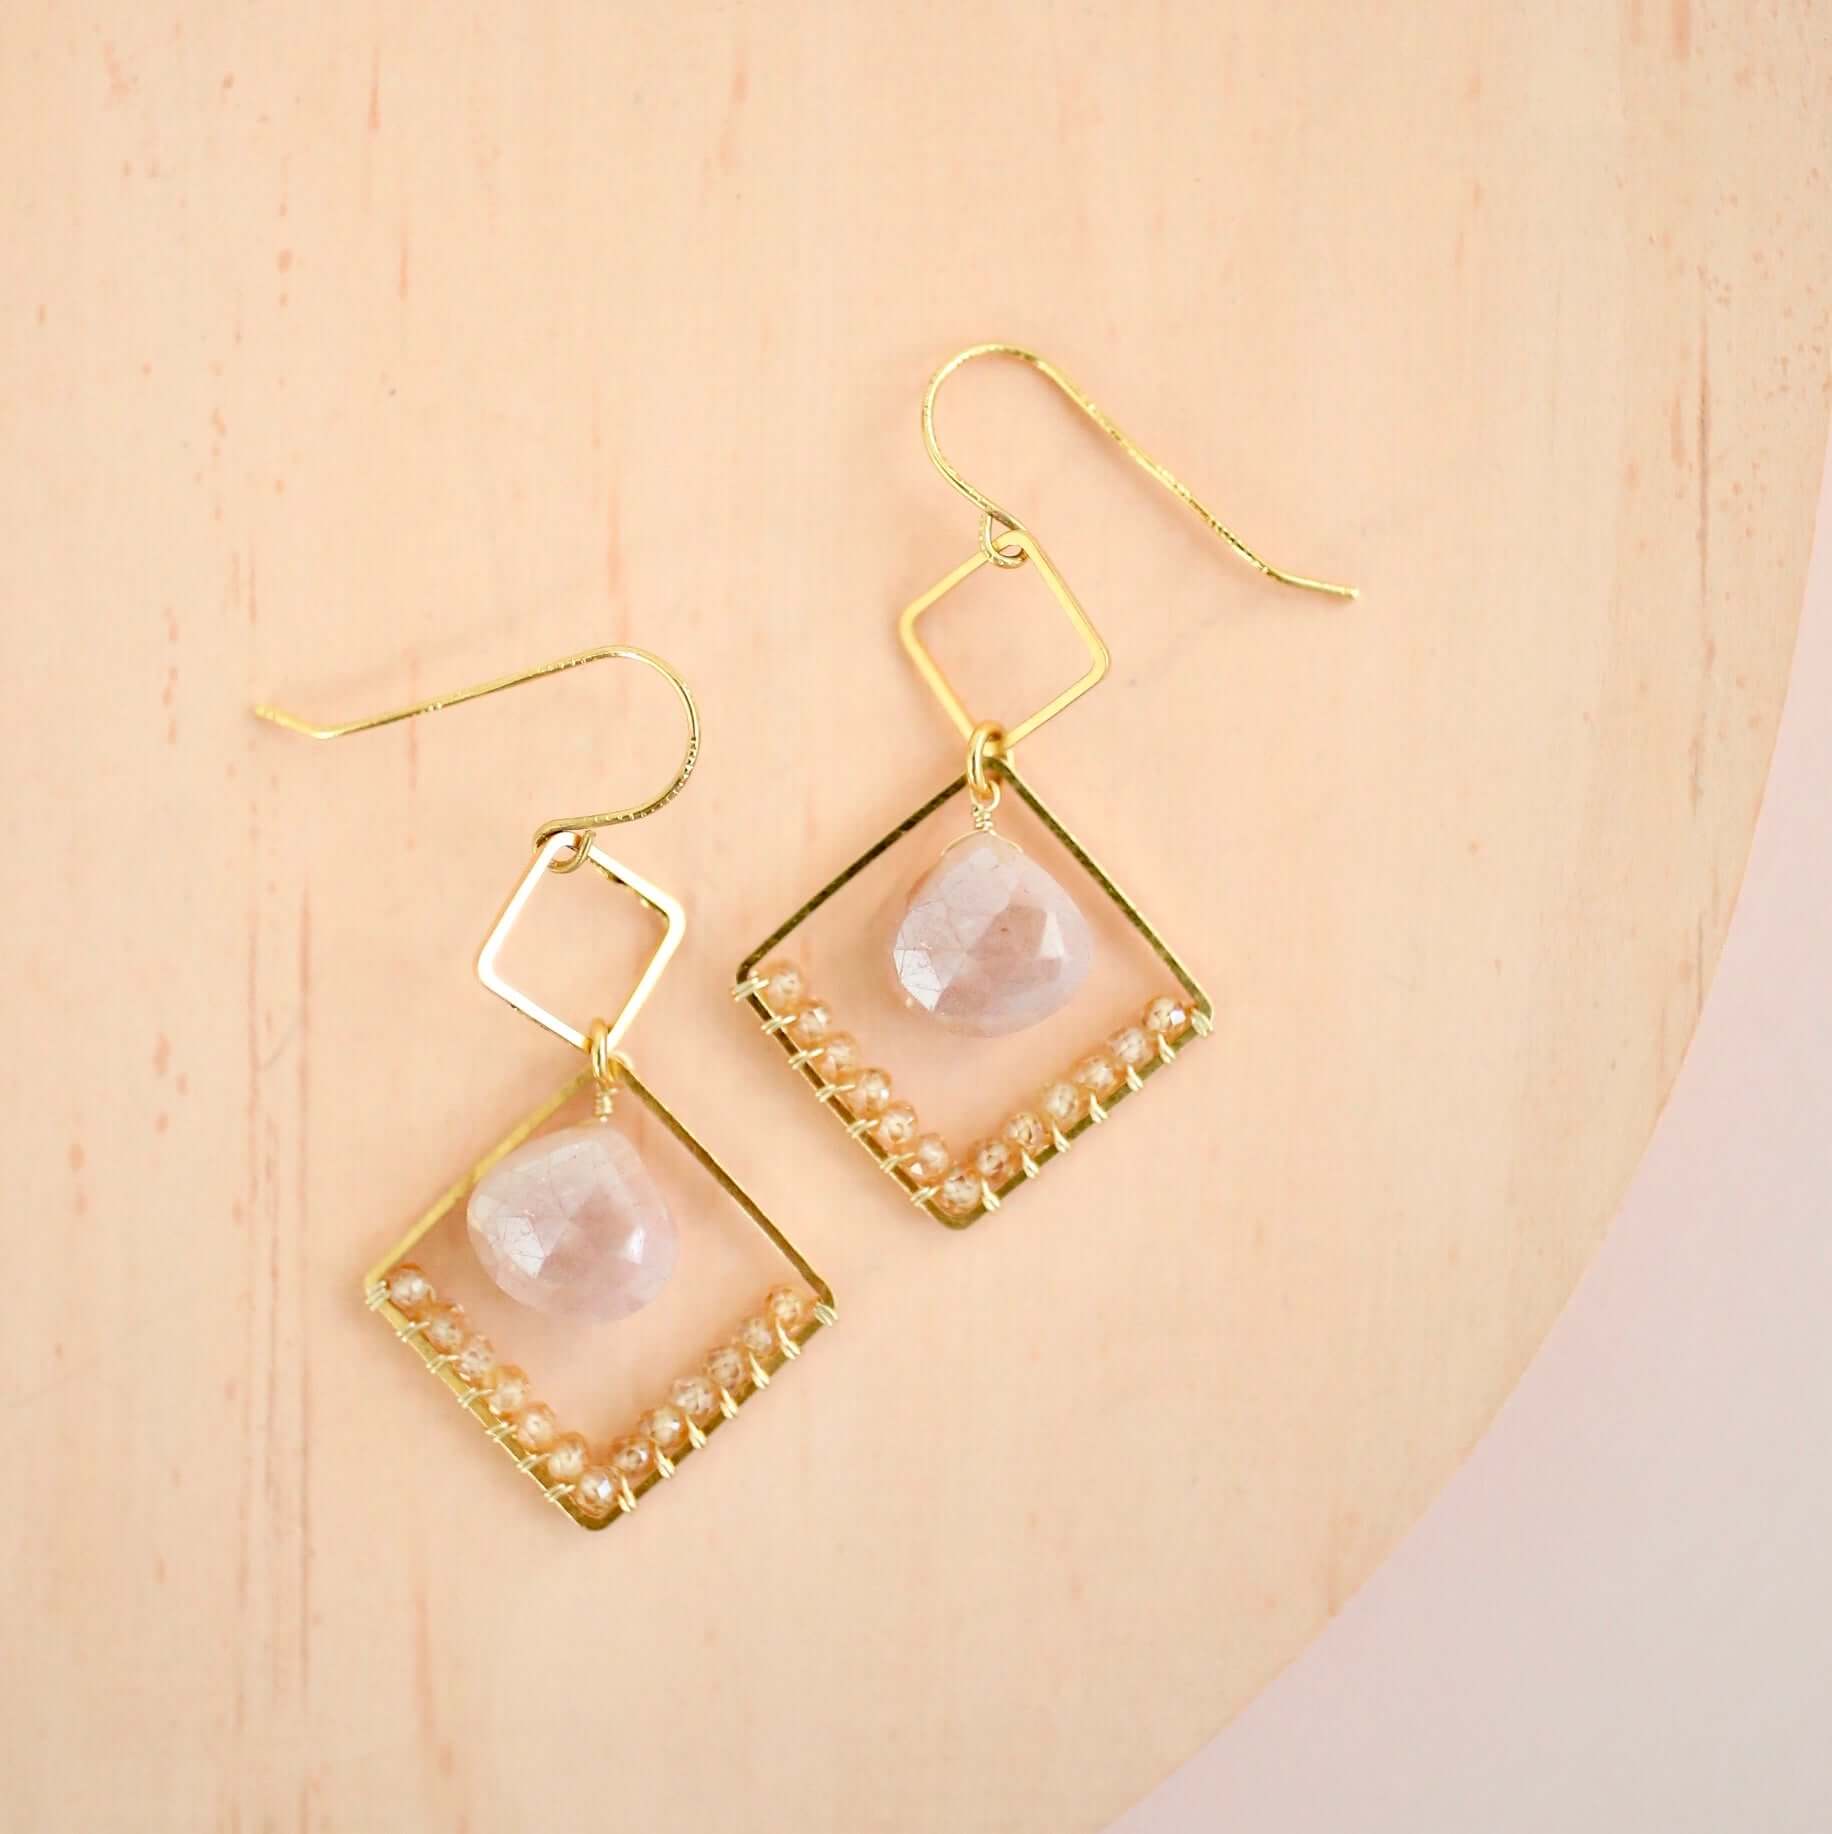 Gold triangle earrings with Peach Moonstone and Champagne Quartz gemstones, French hooks.